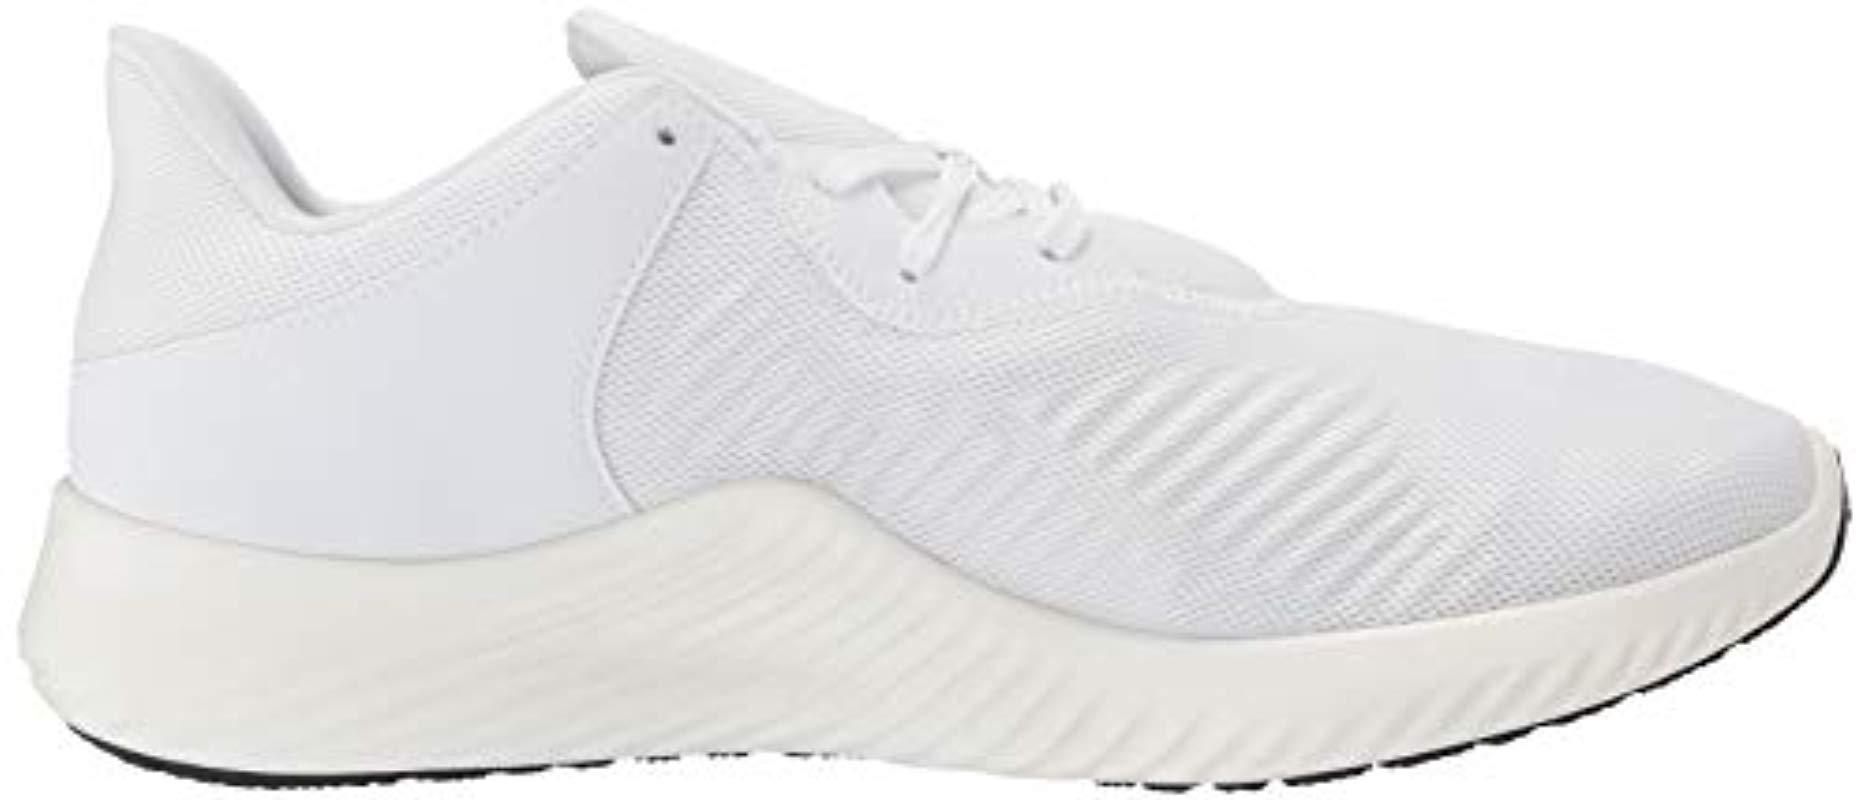 alphabounce rc white